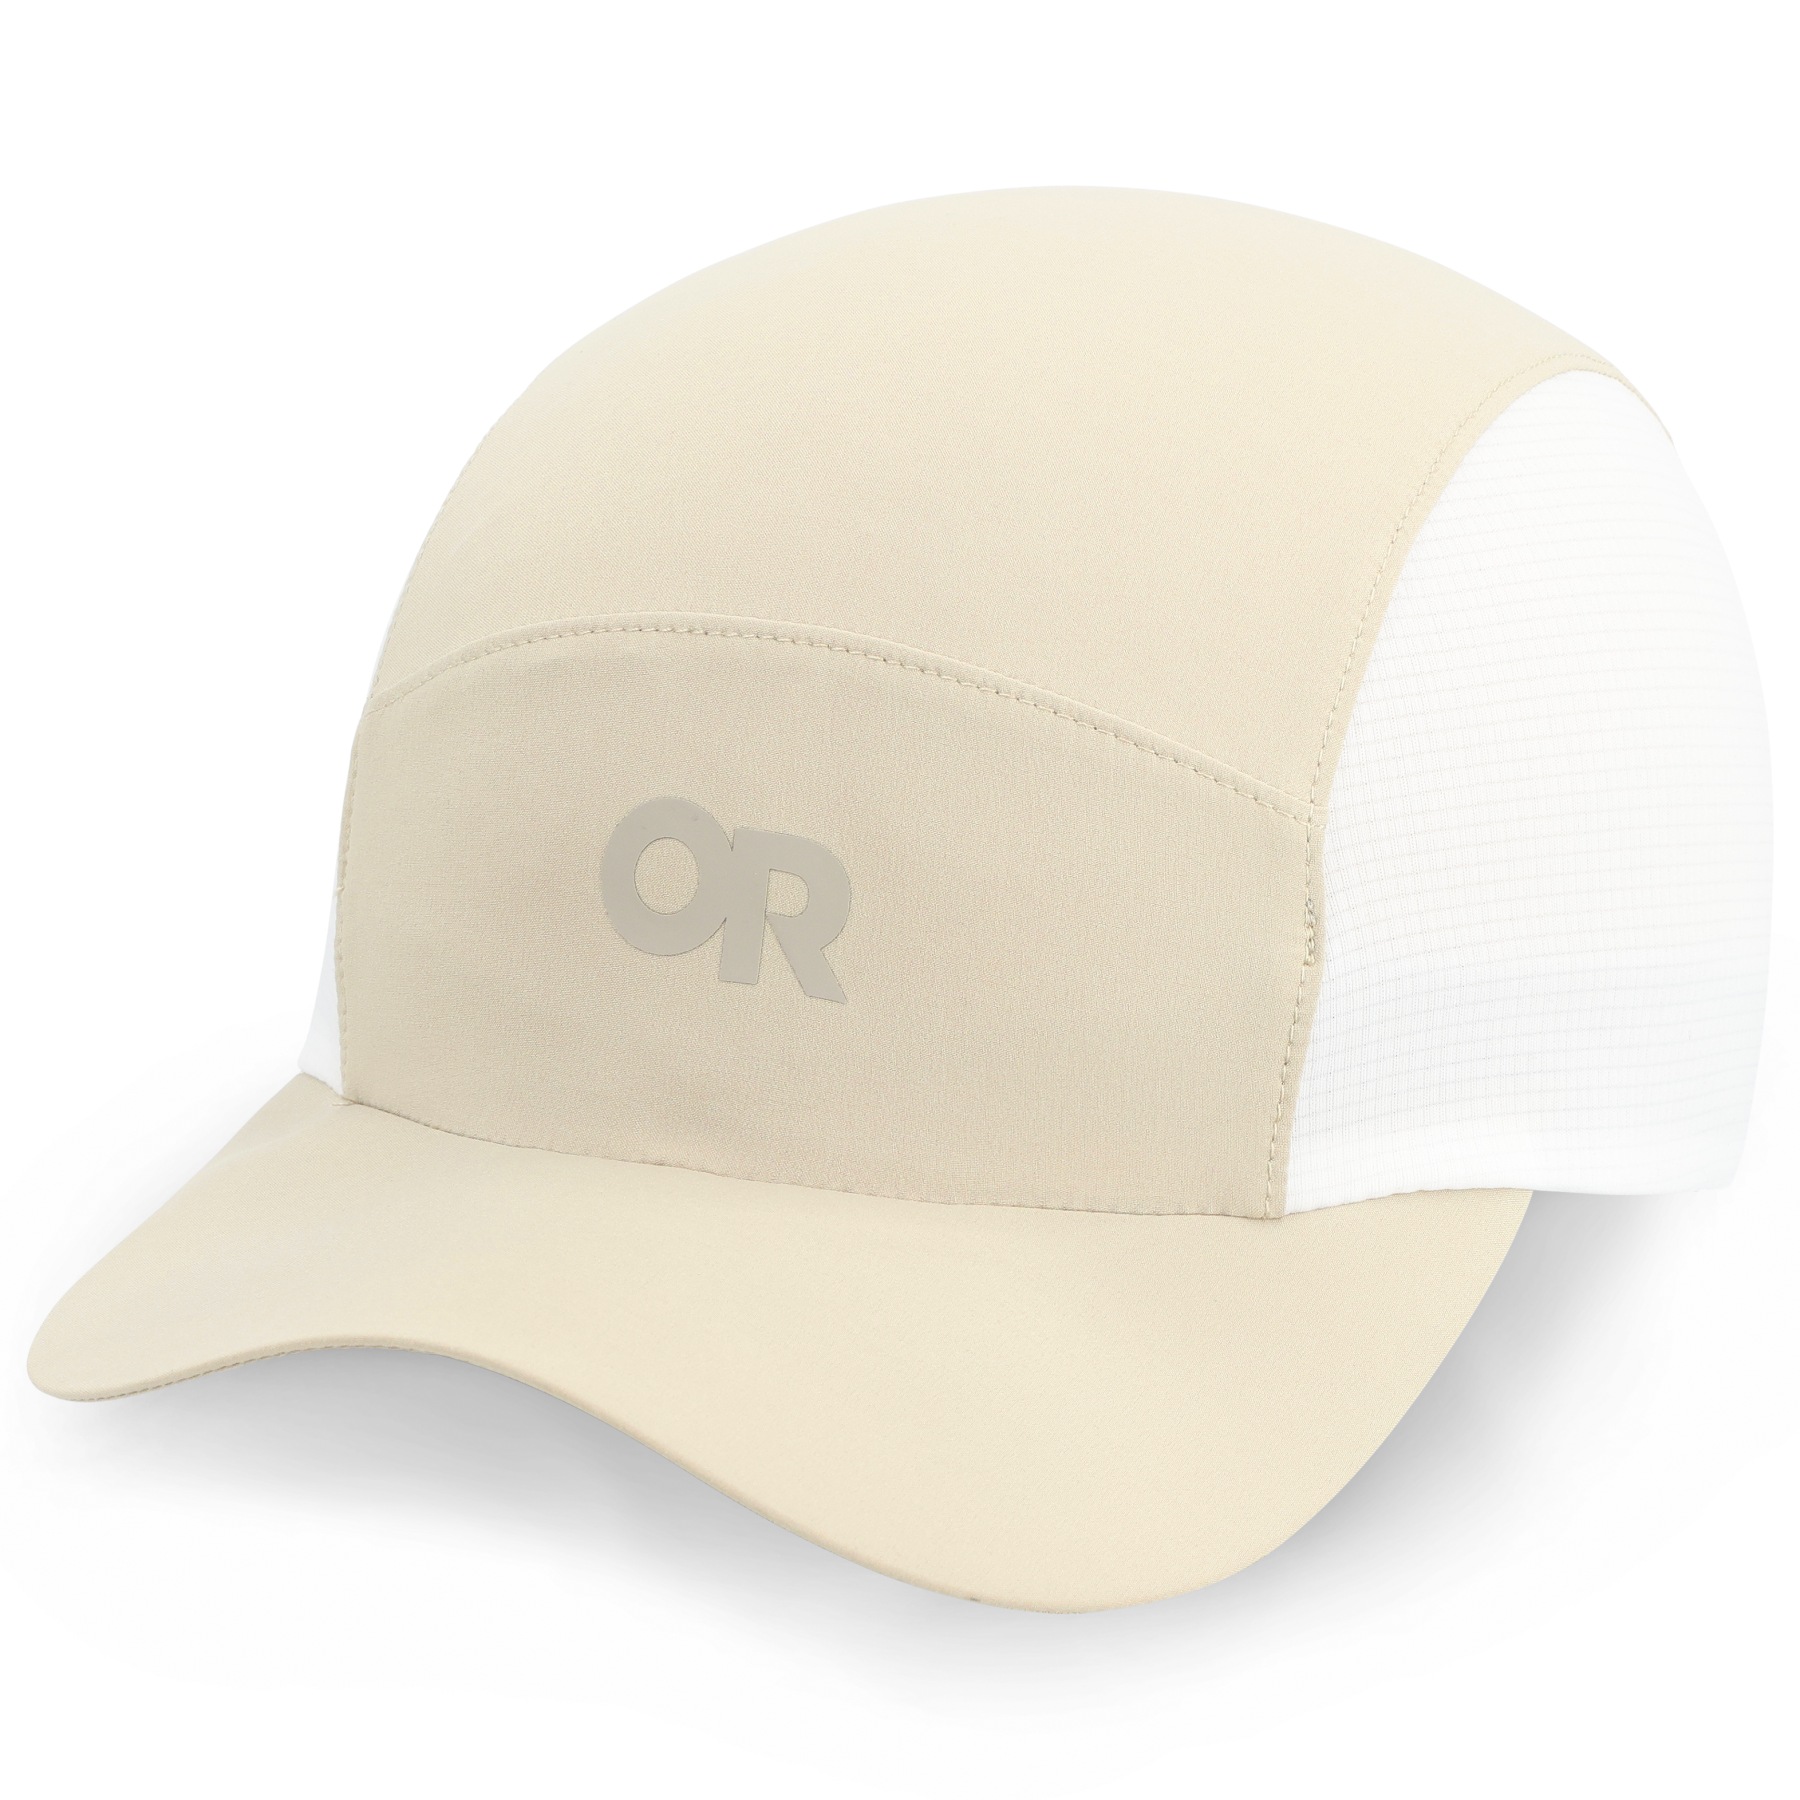 Picture of Outdoor Research Swift Ultra Light Cap - pro khaki/white